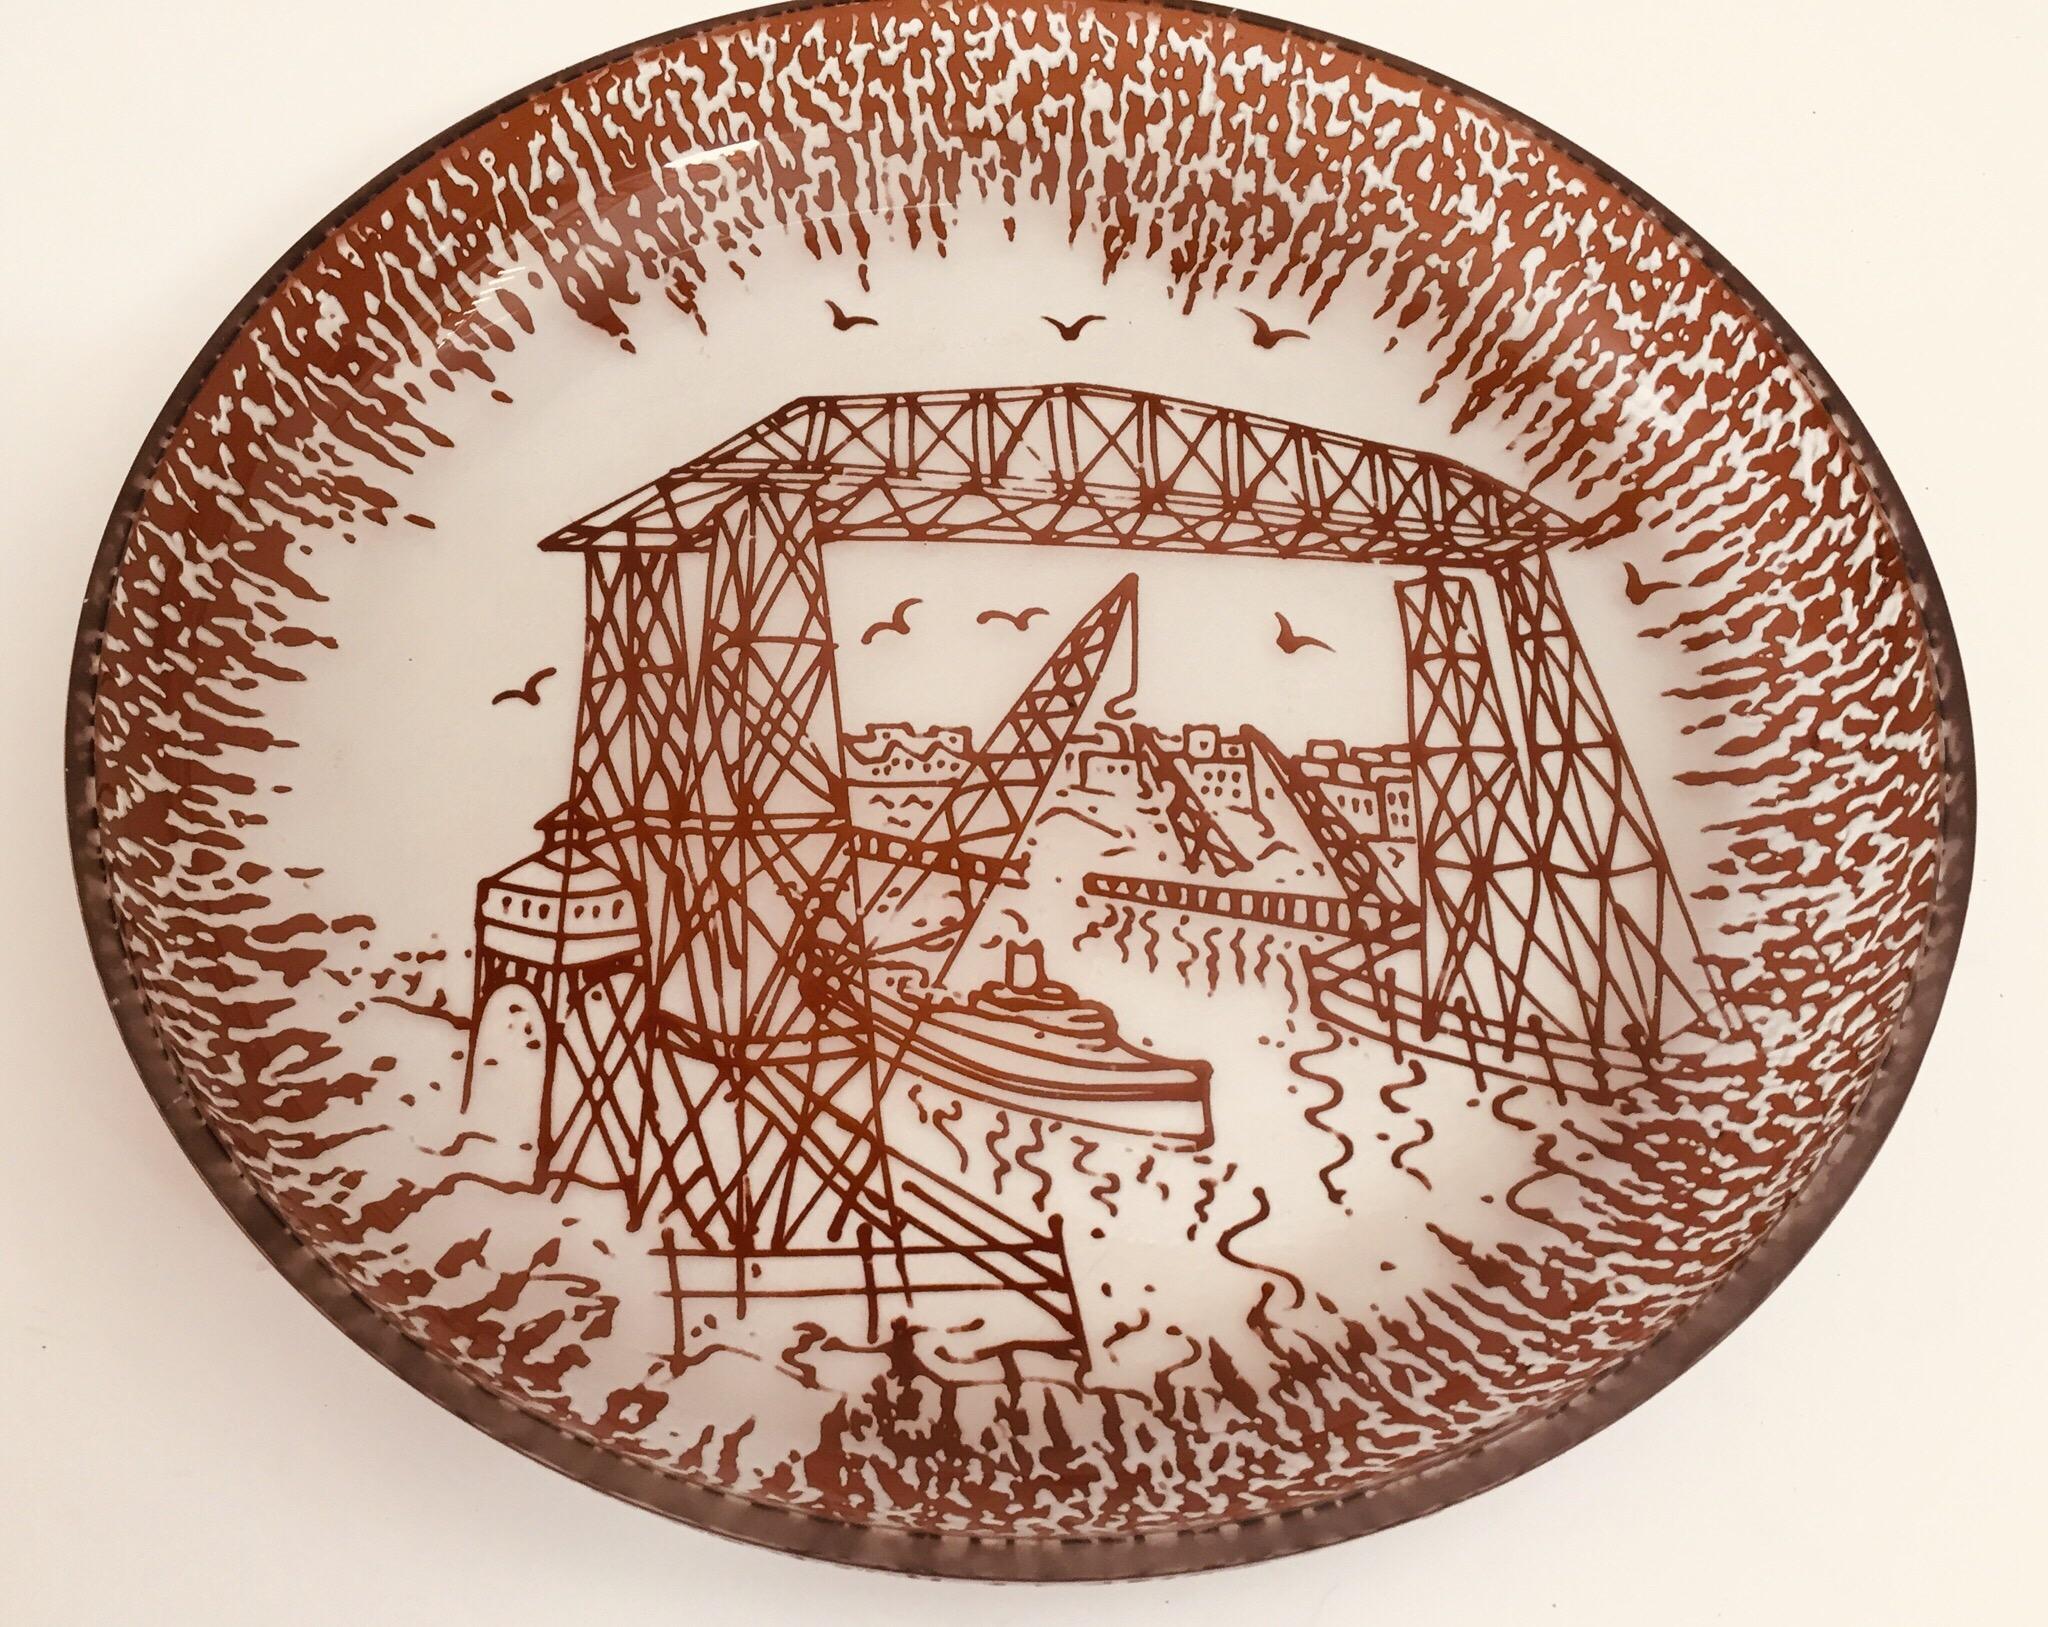 Querandi art glass plate, colored hand graved glass depicting a factory.
Bauhaus industrial style.
Cameo-cut and sandblasted plum-colored glass platter.
Handcrafted in Argentina.
Querandí (name of aborigines of the Santa Fe province in Argentine)